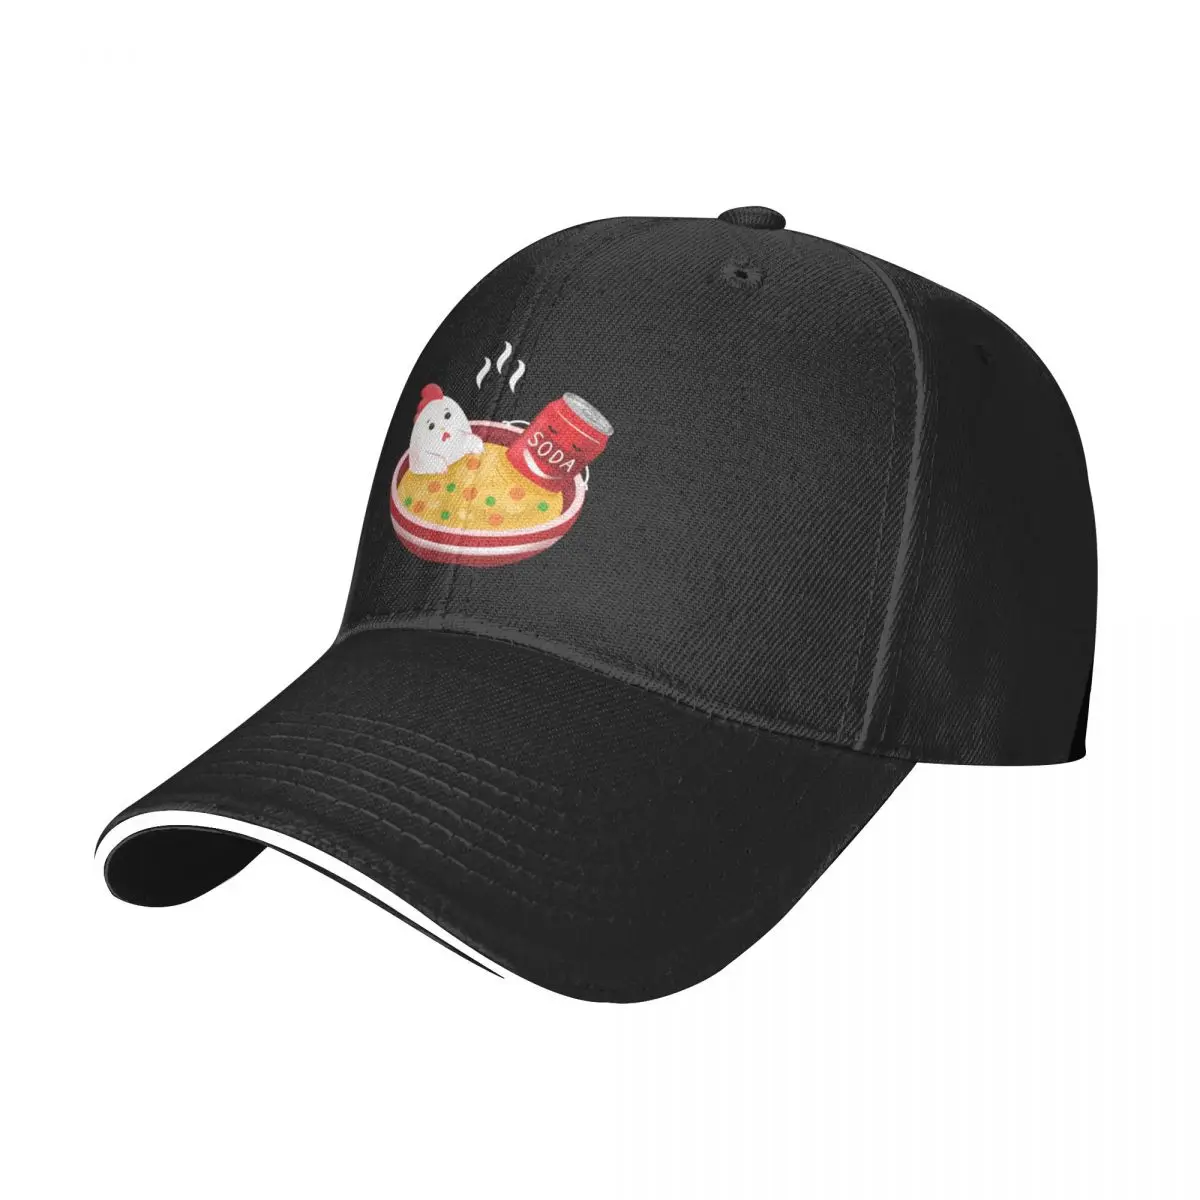 

New love Chicken noodle soup with a soda on the side illustration Baseball Cap Streetwear Funny Hat Men'S Hat Women'S